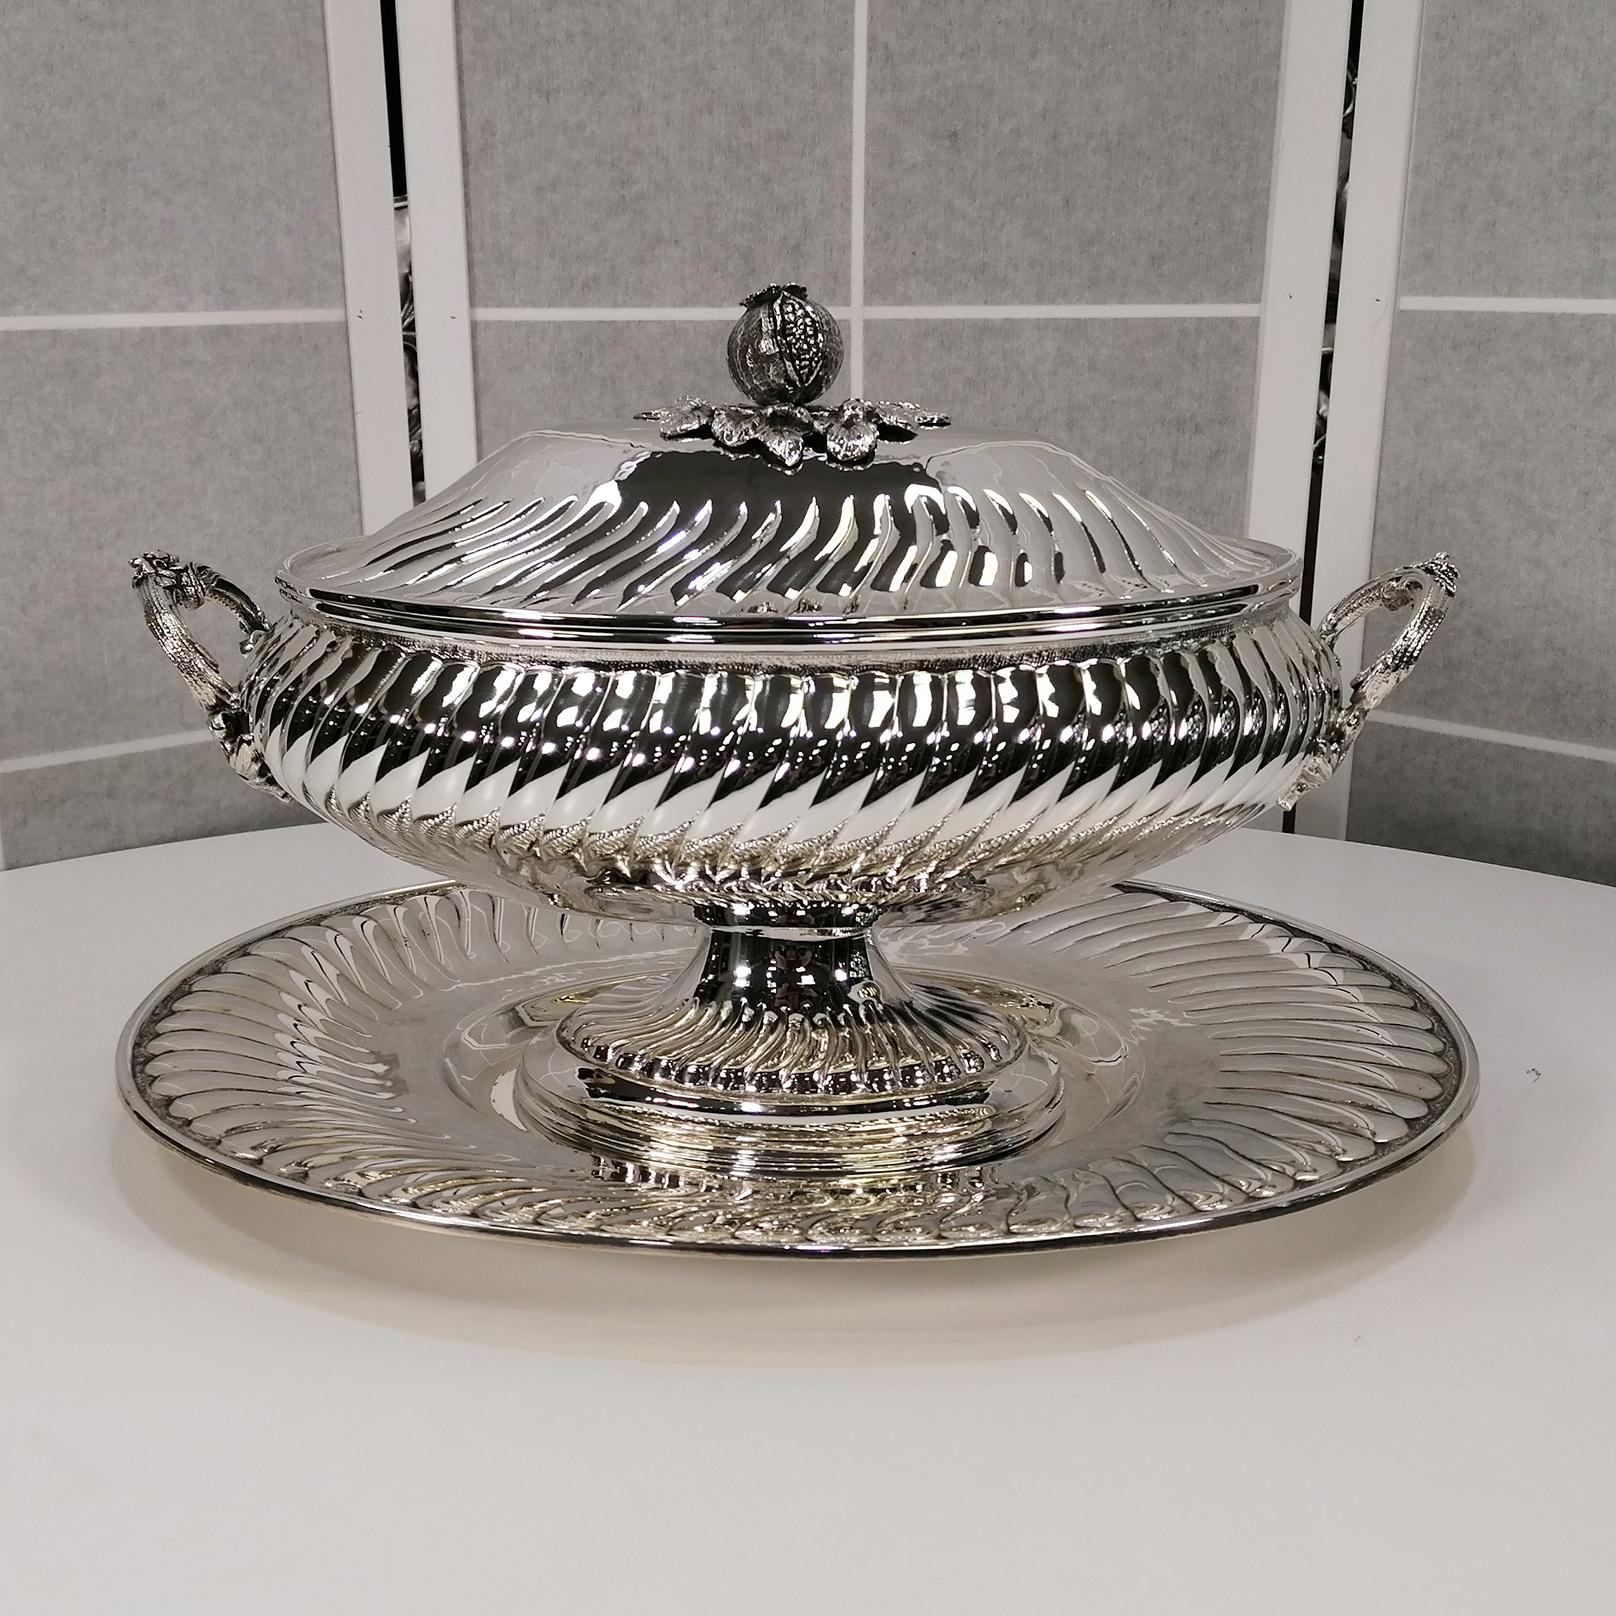 Large oval tureen with Torchon Baroque style plate.
The plate, suitable and balanced in proportions to perfectly contain the tureen, is also oval with a smooth central part and a large embossed and chiseled torchon edge
The tureen has an important